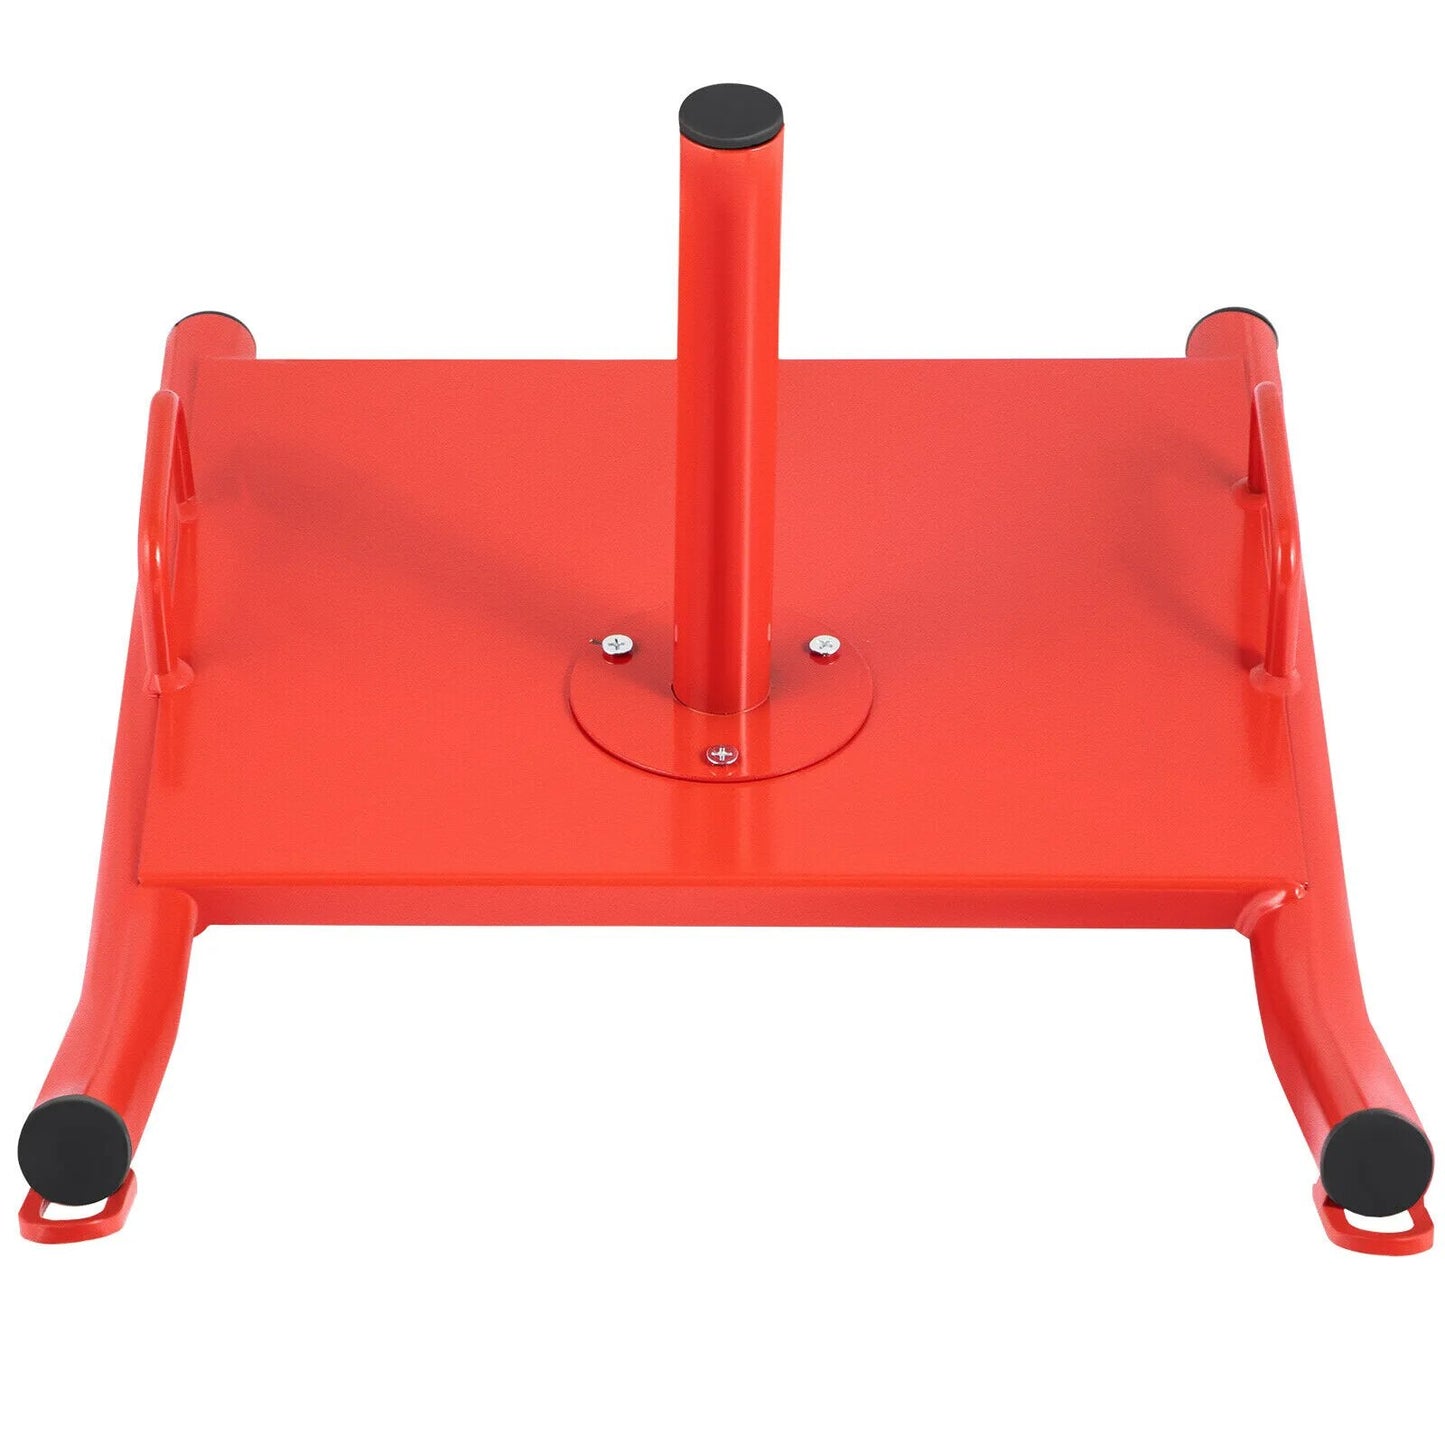 Weighted Sled w/ Adjustable Shoulder Harness